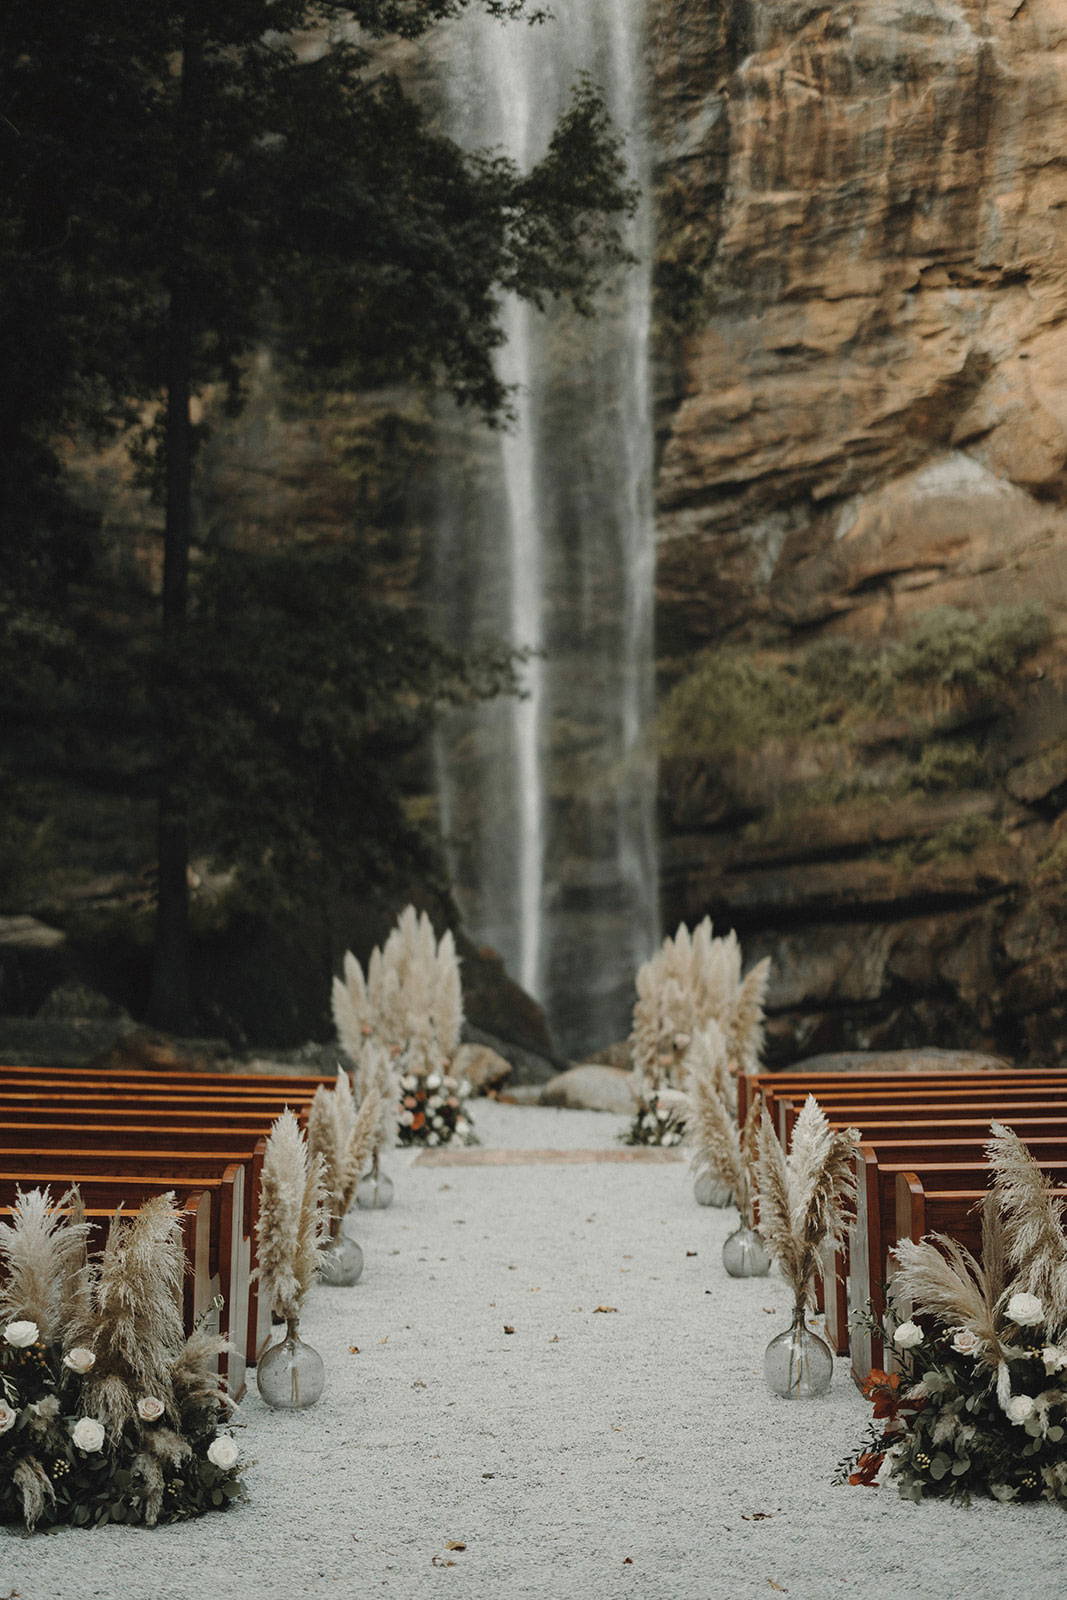 Outdoor wedding ceremony with wooden pews and floral arrangement